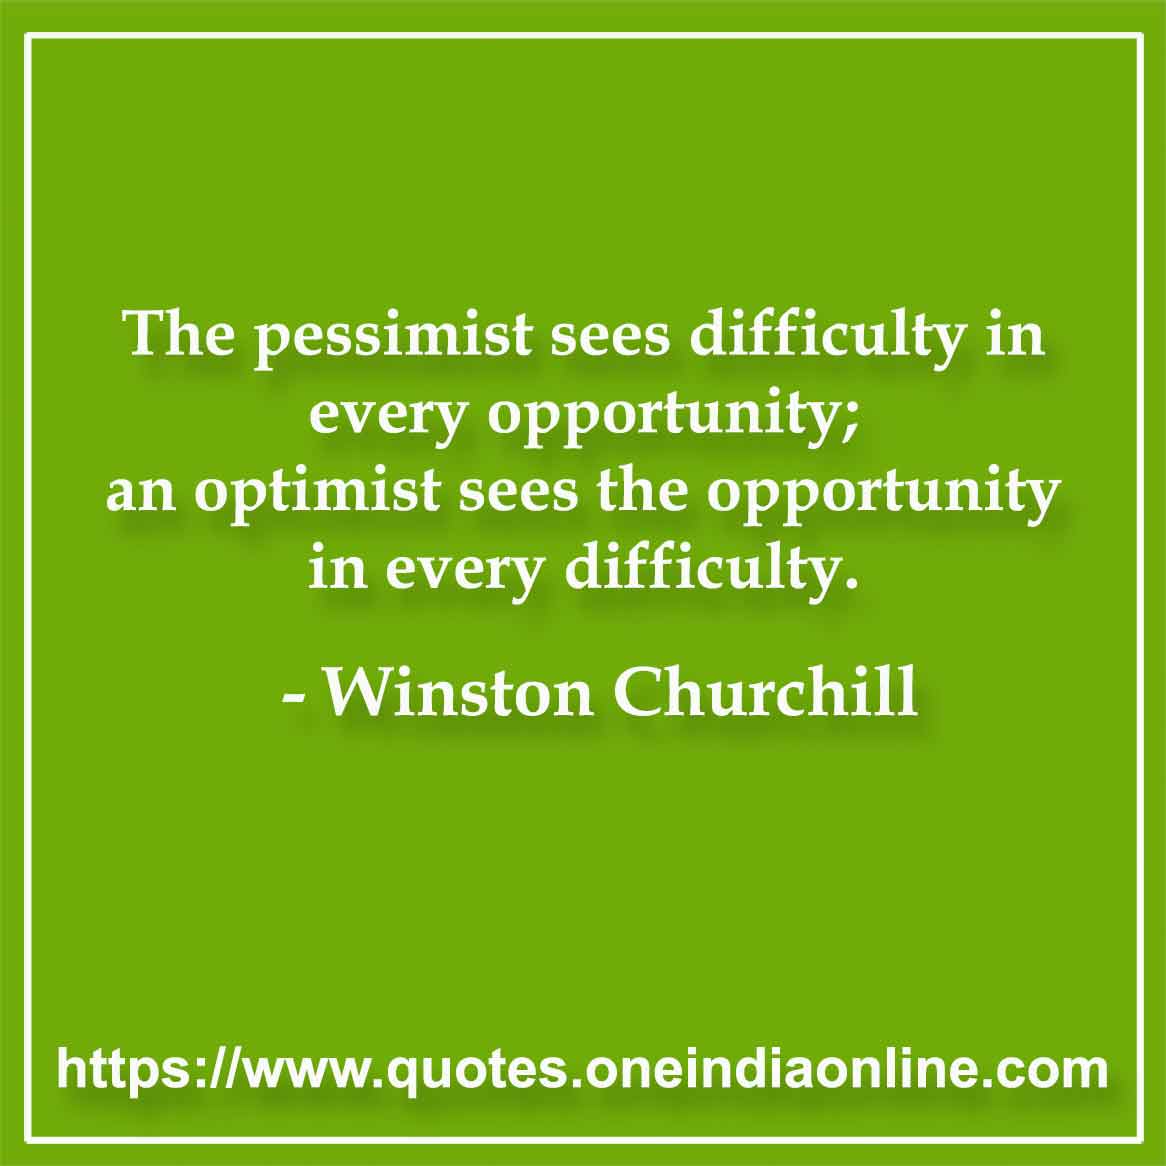 The pessimist sees difficulty in every opportunity; an optimist sees the opportunity in every difficulty.

-by Winston Churchill